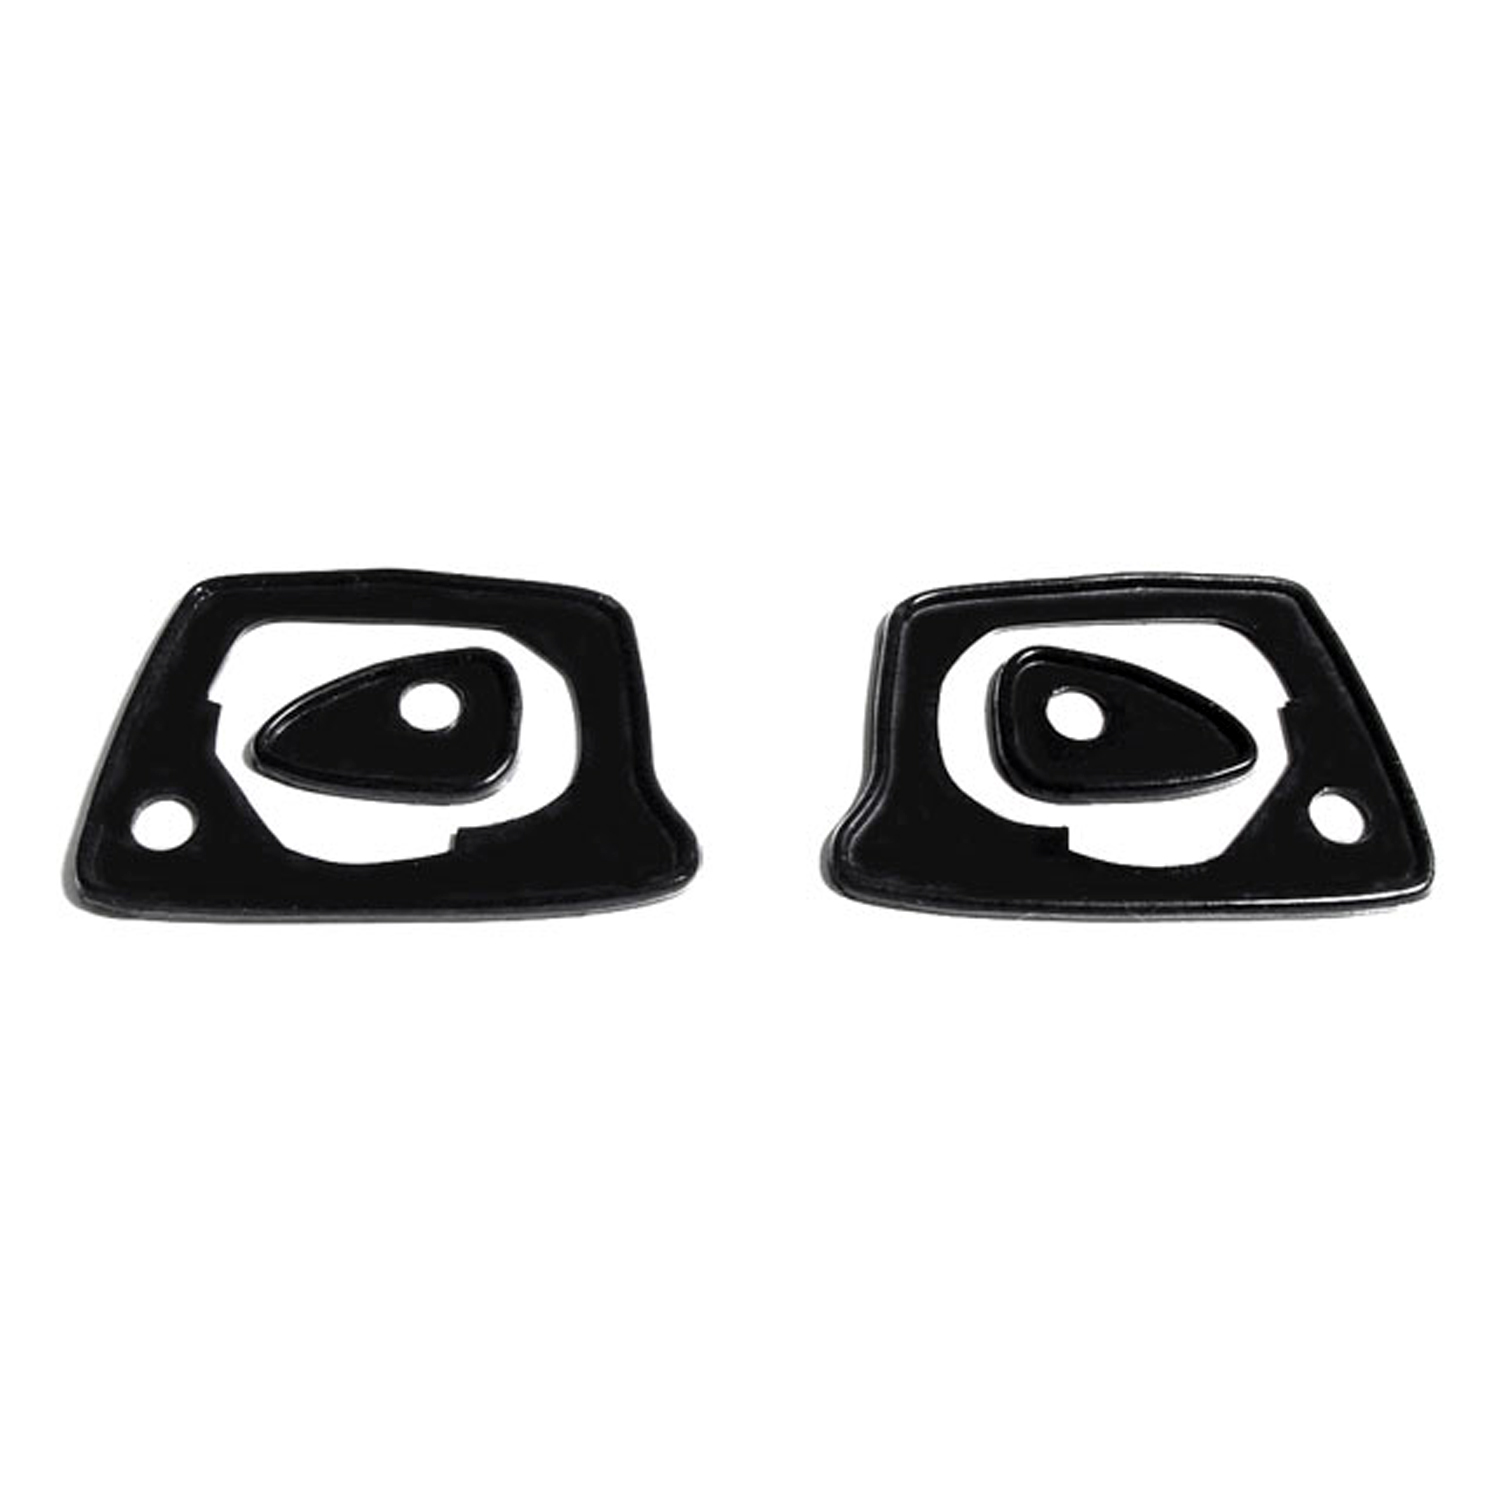 1971 Plymouth Fury II Door handle mounting pads.  2-3/8 in. L x 1-1/8 in. L-MP 959-B